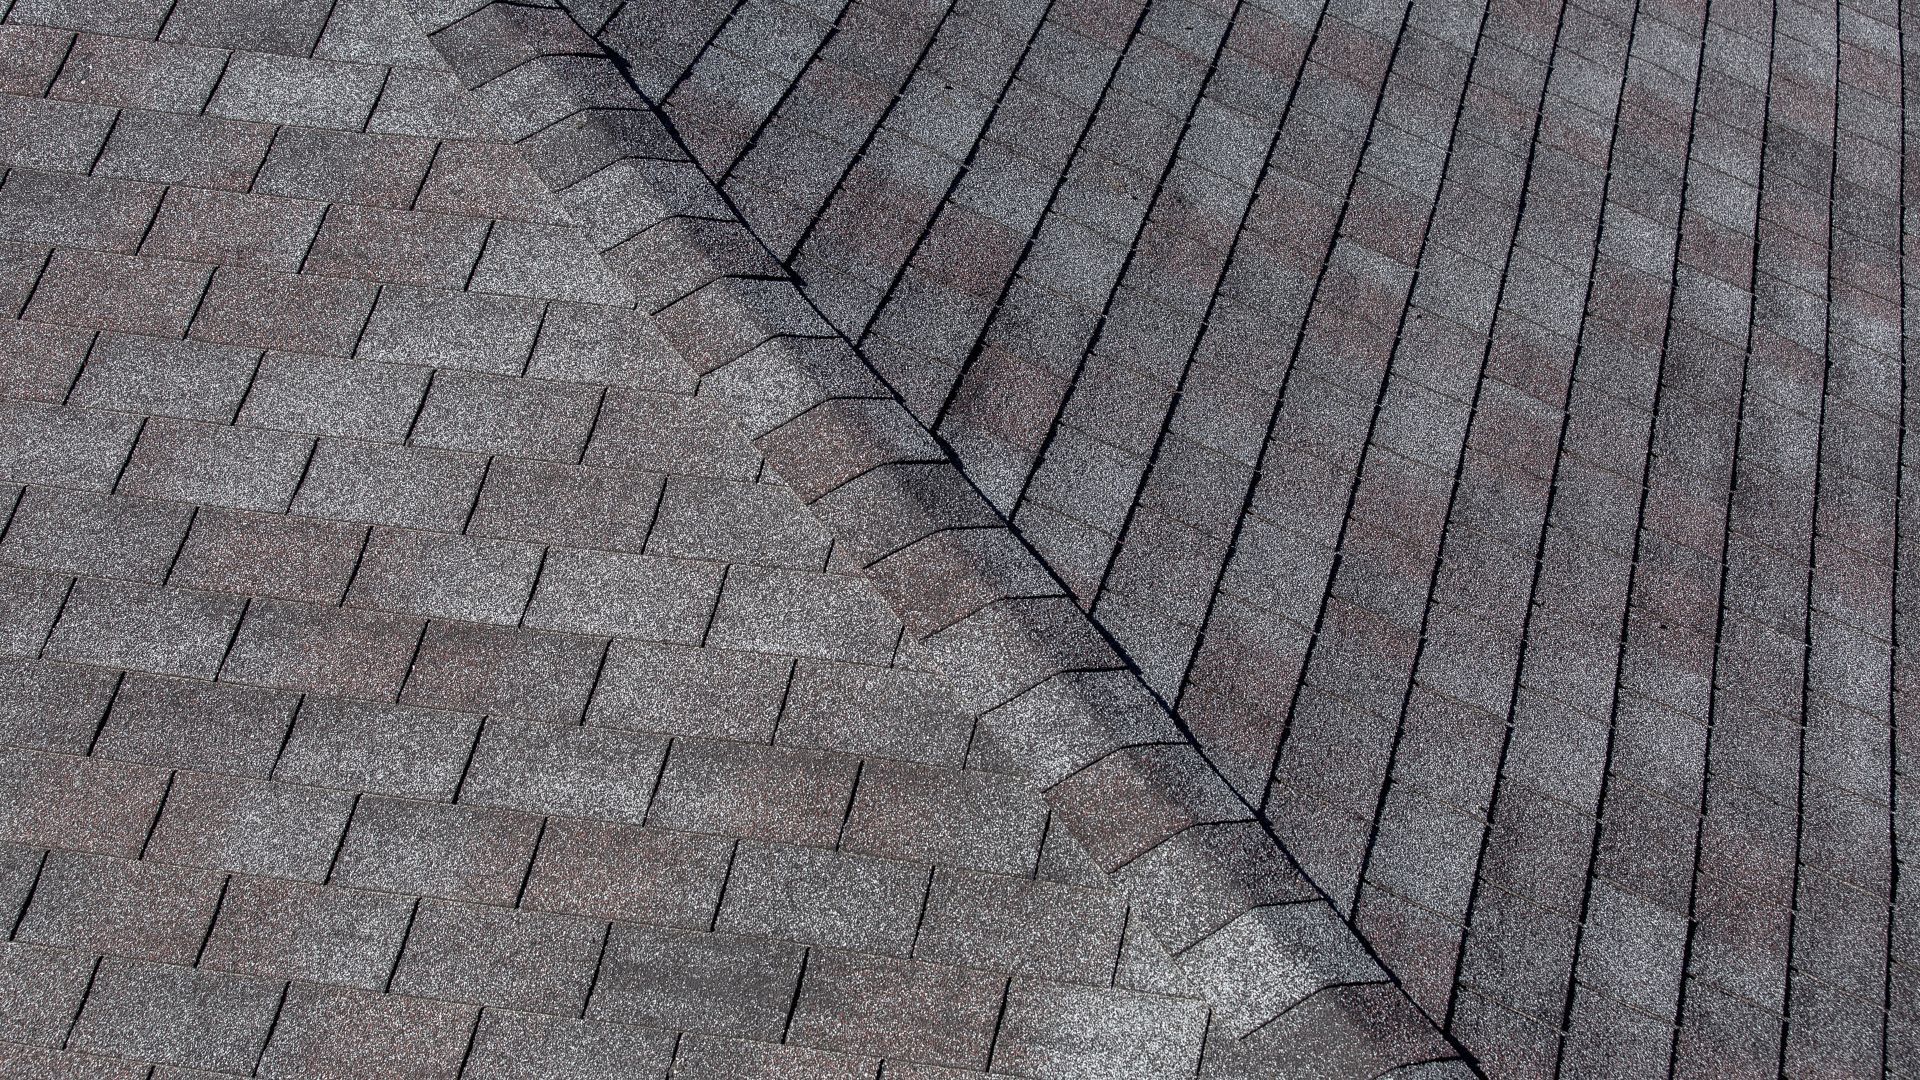 C1628 - Influence Roofing - Why You Should Not Fix Your Roof Yourself - Hero Image.jpg